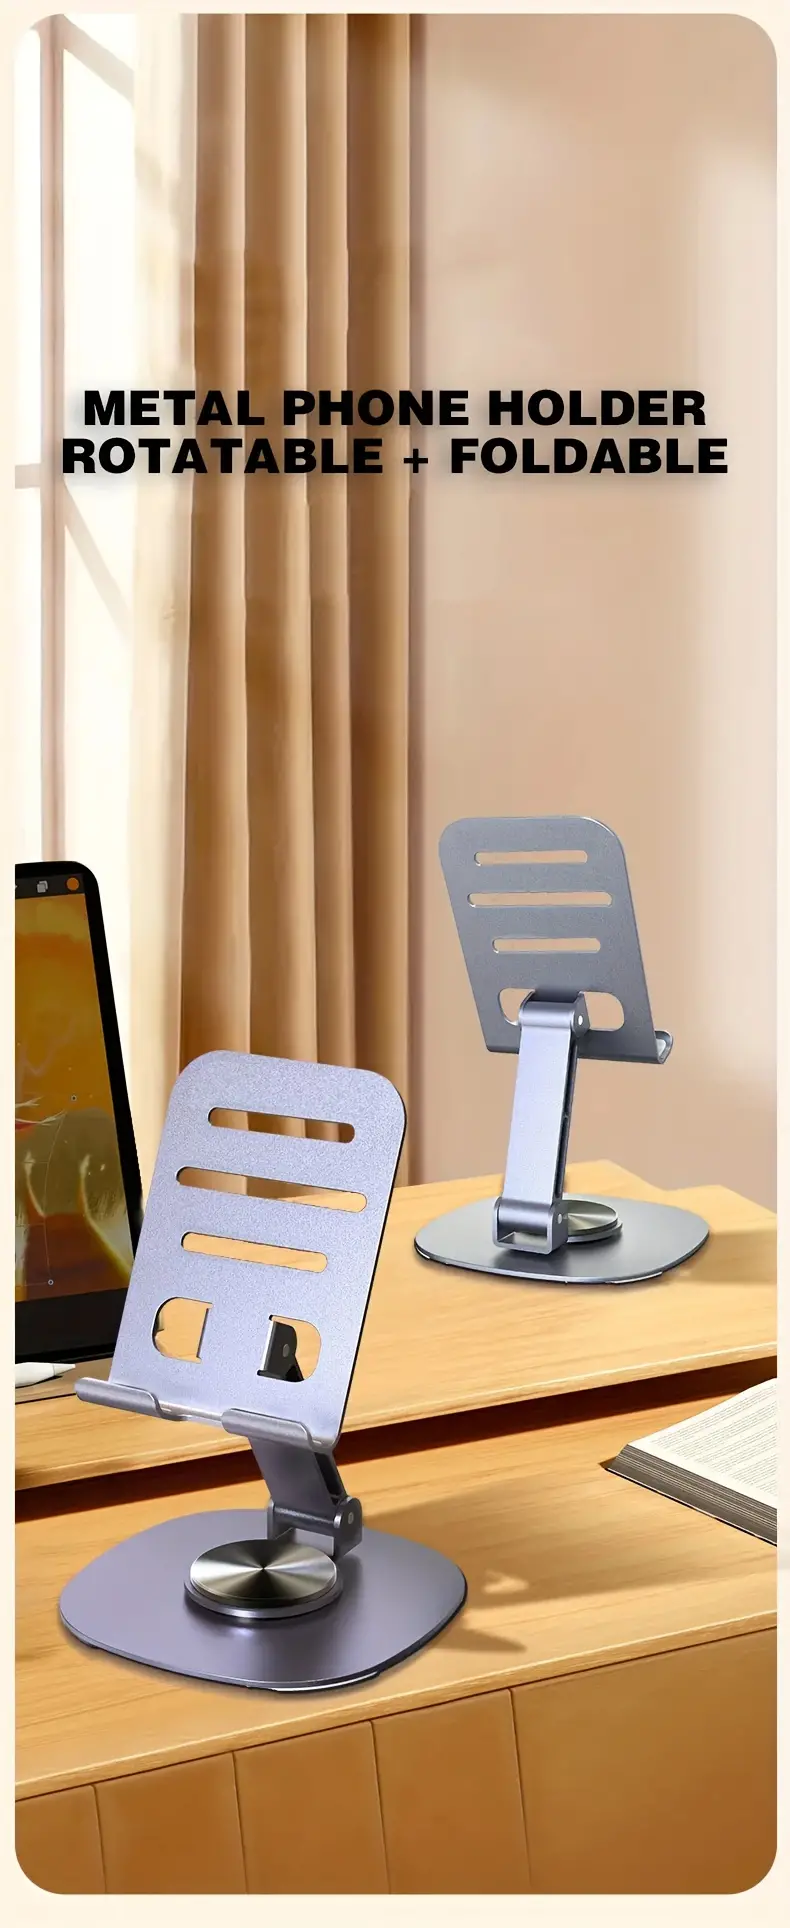 1pc phone desktop rotating stand mobile phone holder switch game console stand foldable and portable for convenience 360 degree rotatable for flexible height adjustment a hands free device for freeing your hands details 0